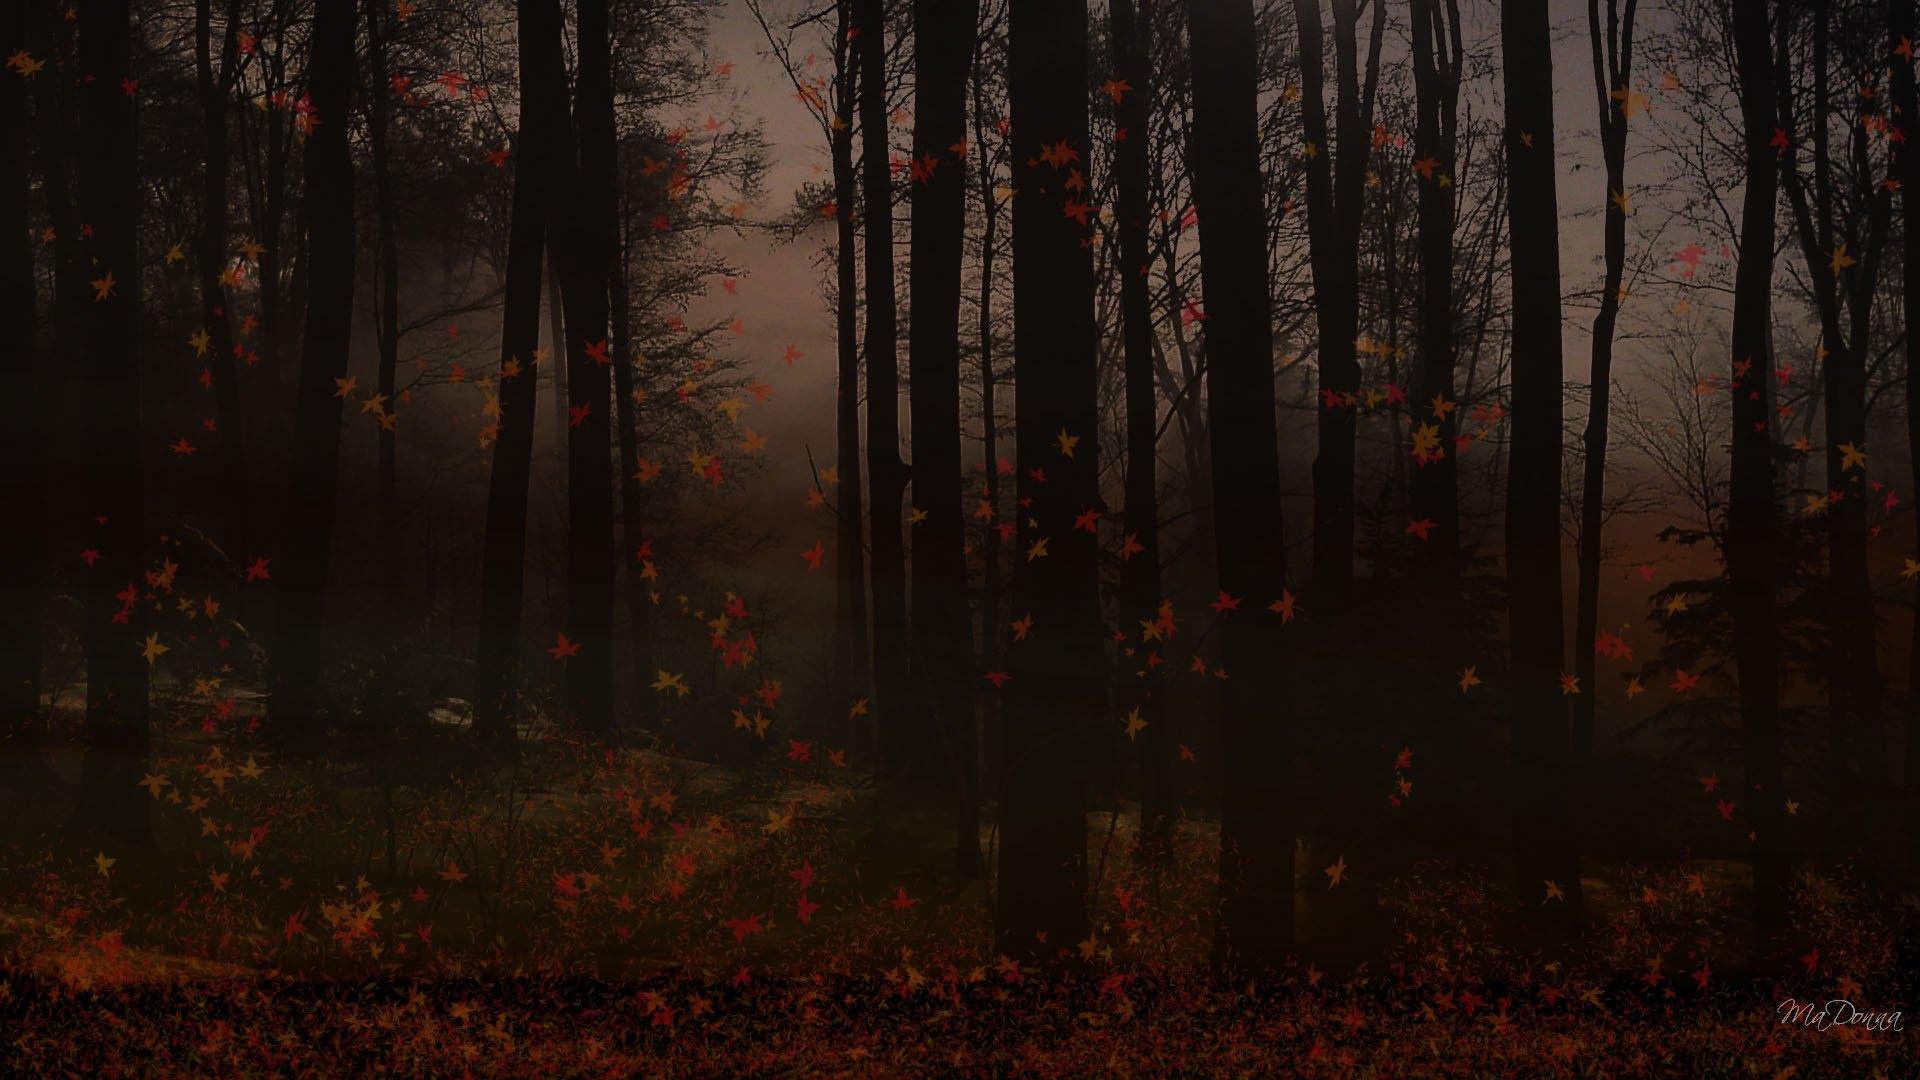 autumn-dusk-in-the-forest-1080P-wallpaper_0042f937-1a02-4f66-af11-b31558f0be83.jpg